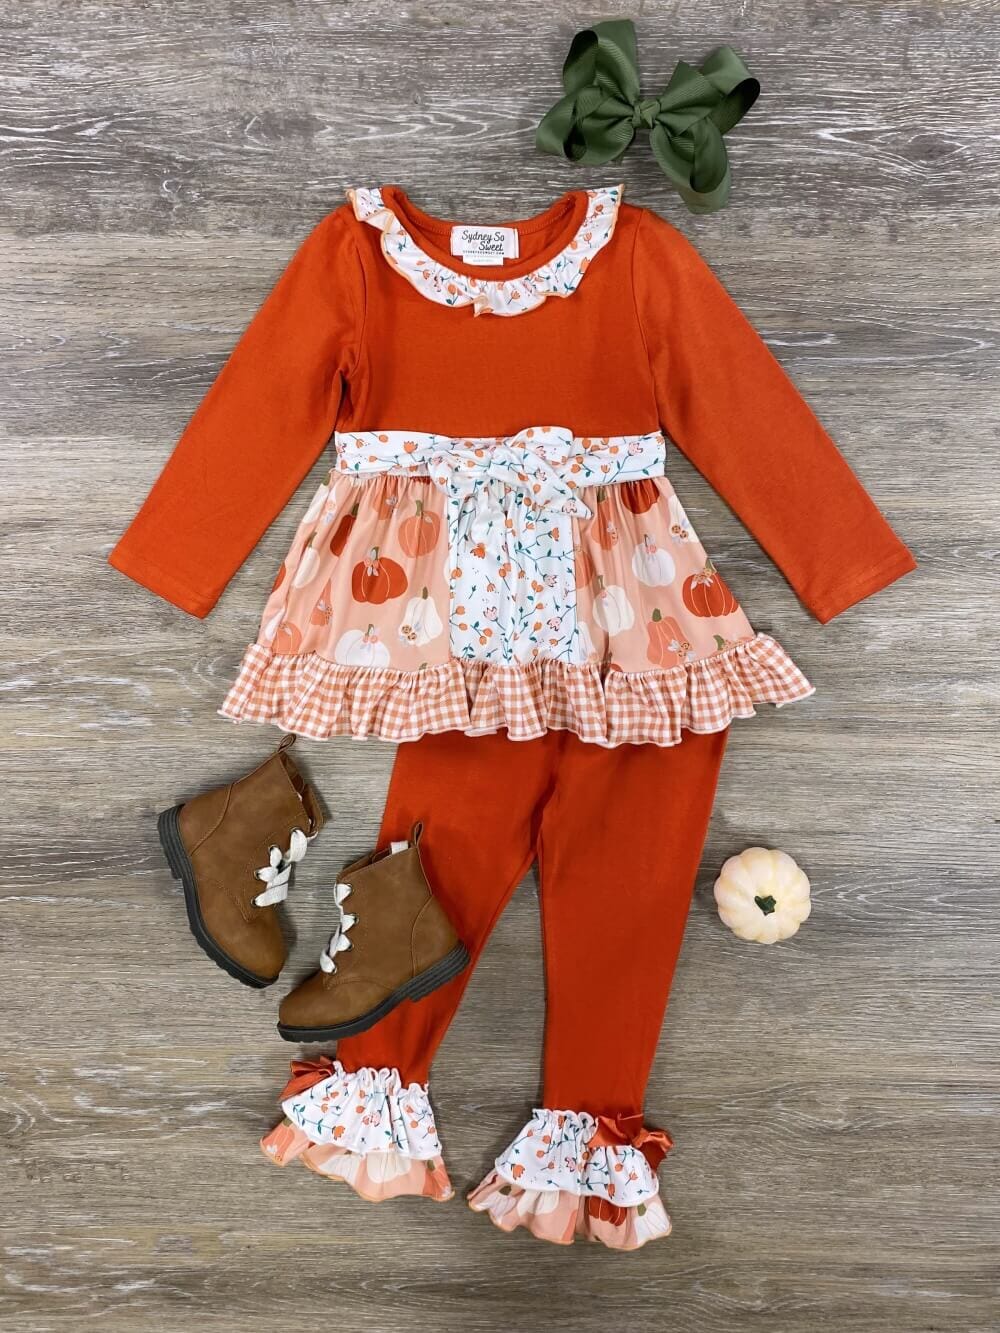 Orange You Glad It's Fall Girls Tunic Top Outfit - Sydney So Sweet